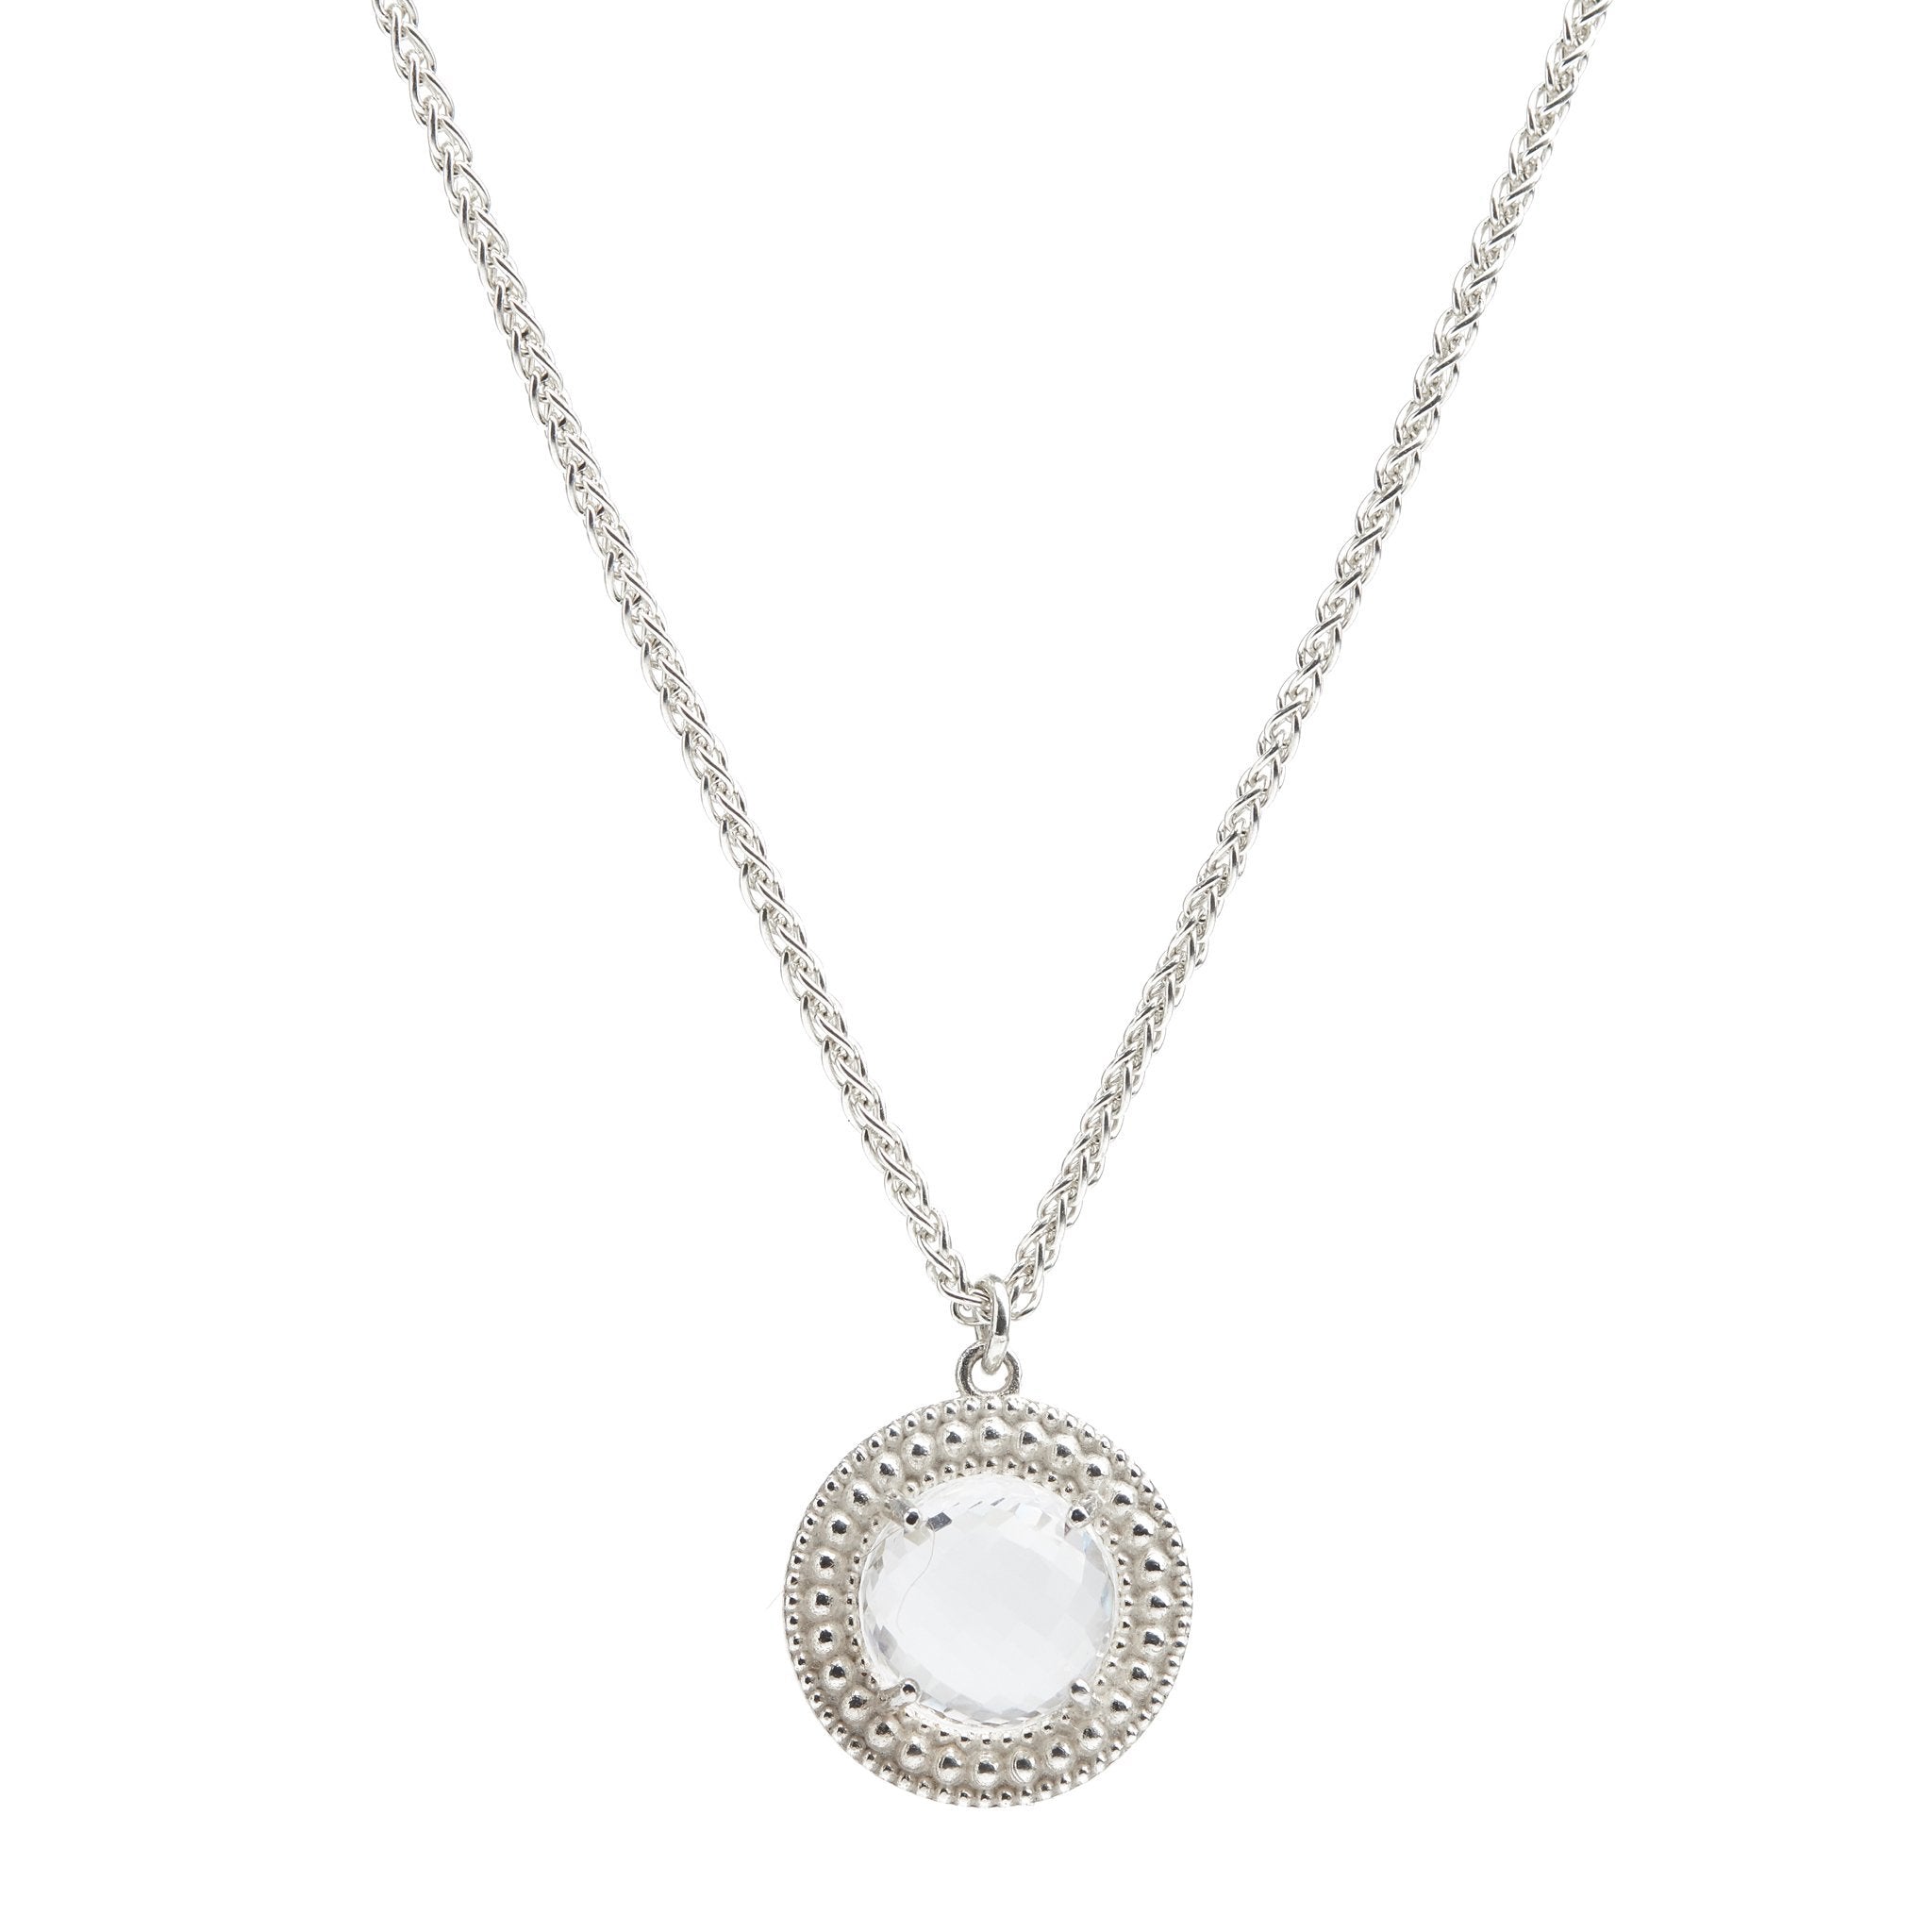 The Classic Renaissance Necklace with a crystal Disco ball. - Christelle Chamberland